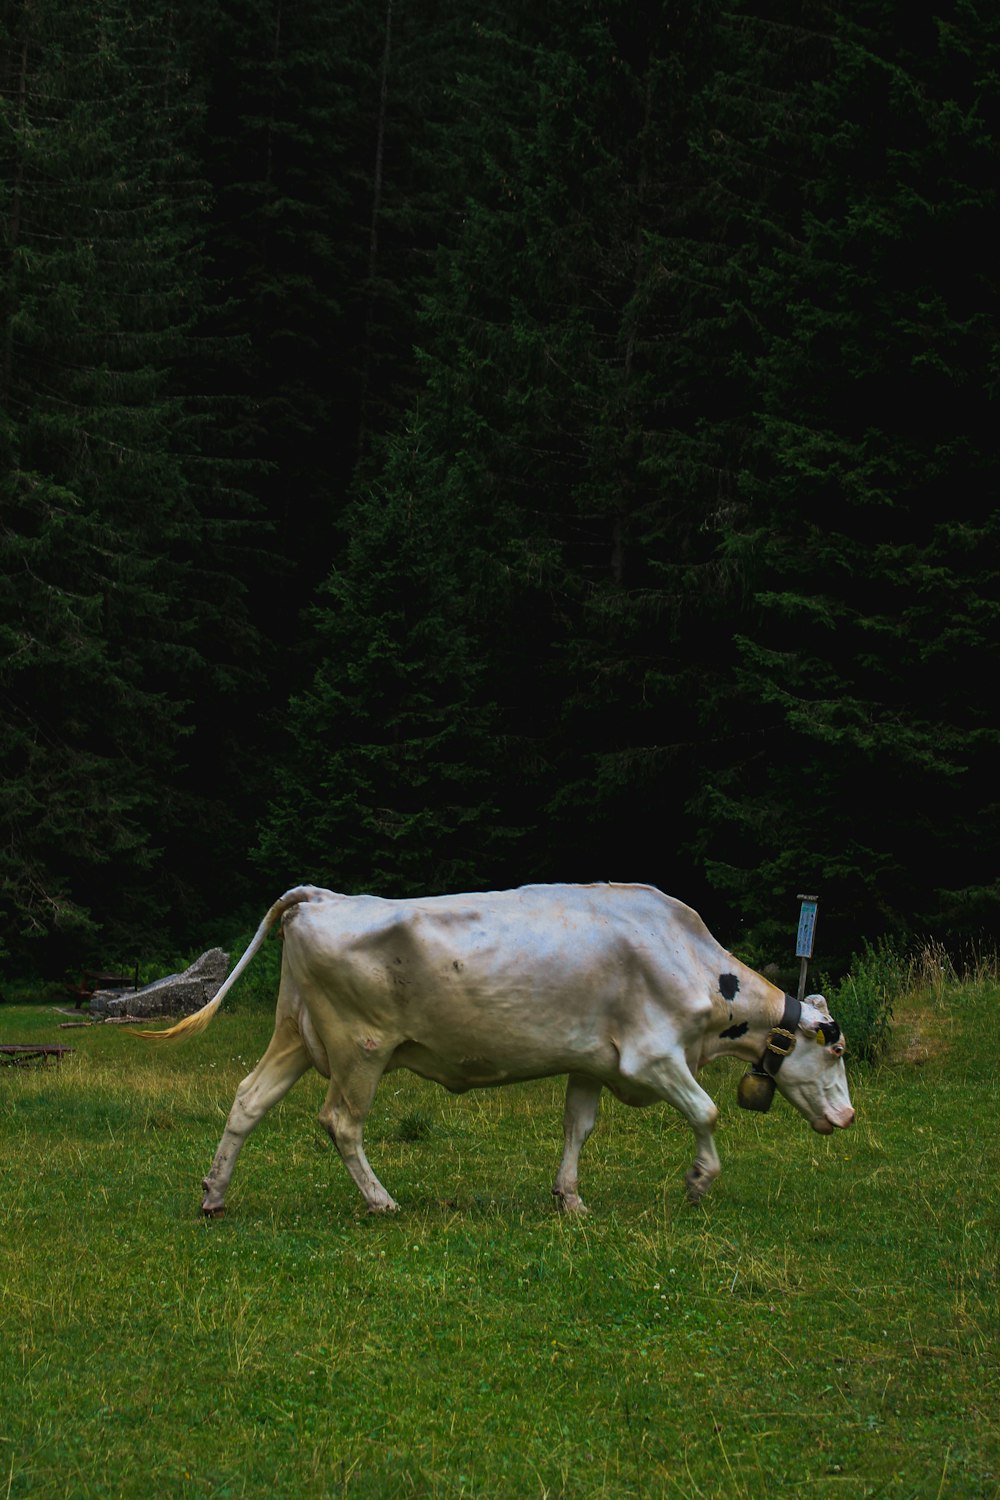 a cow with a bell on its neck walking in a field